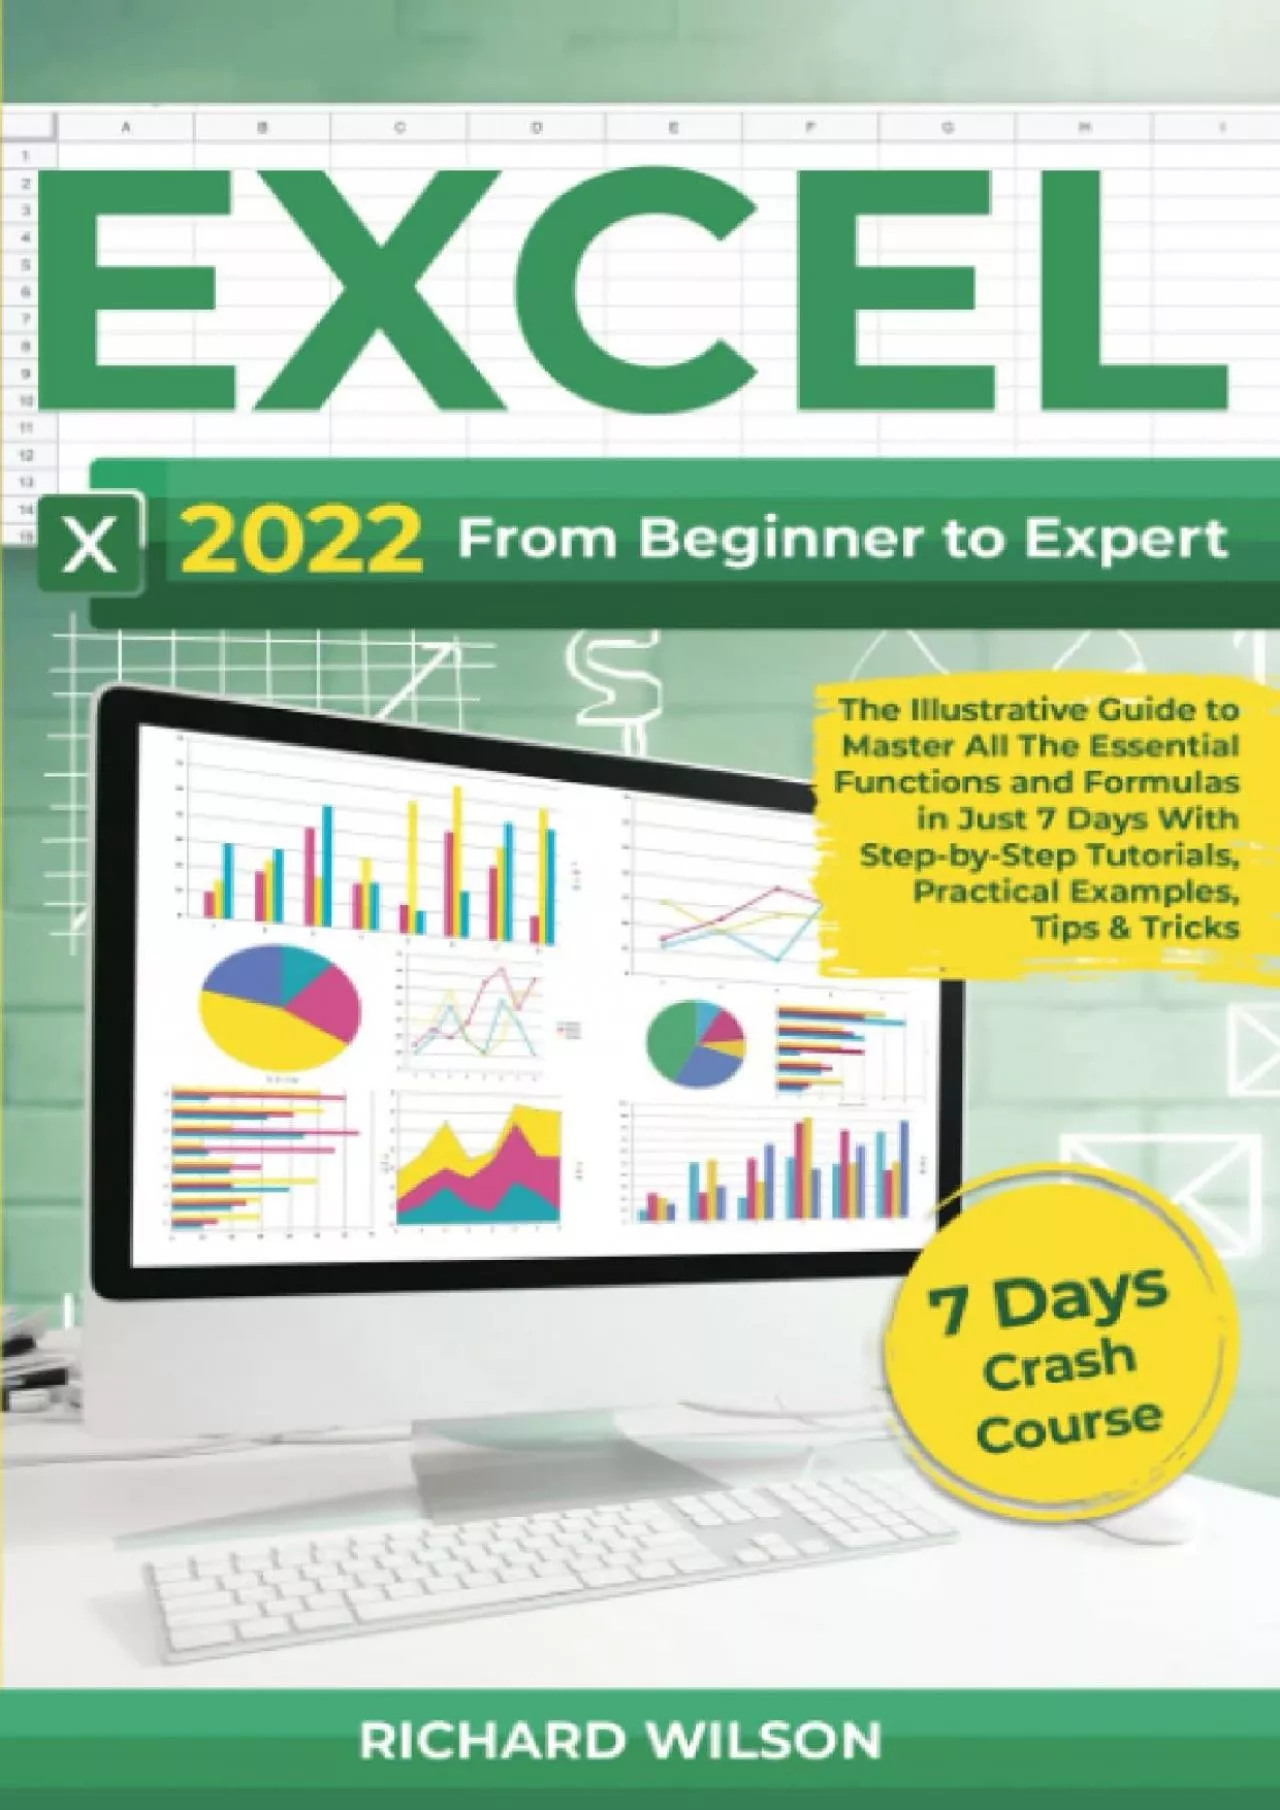 [READING BOOK]-EXCEL 2022 From Beginner to Expert | The Illustrative Guide to Master All